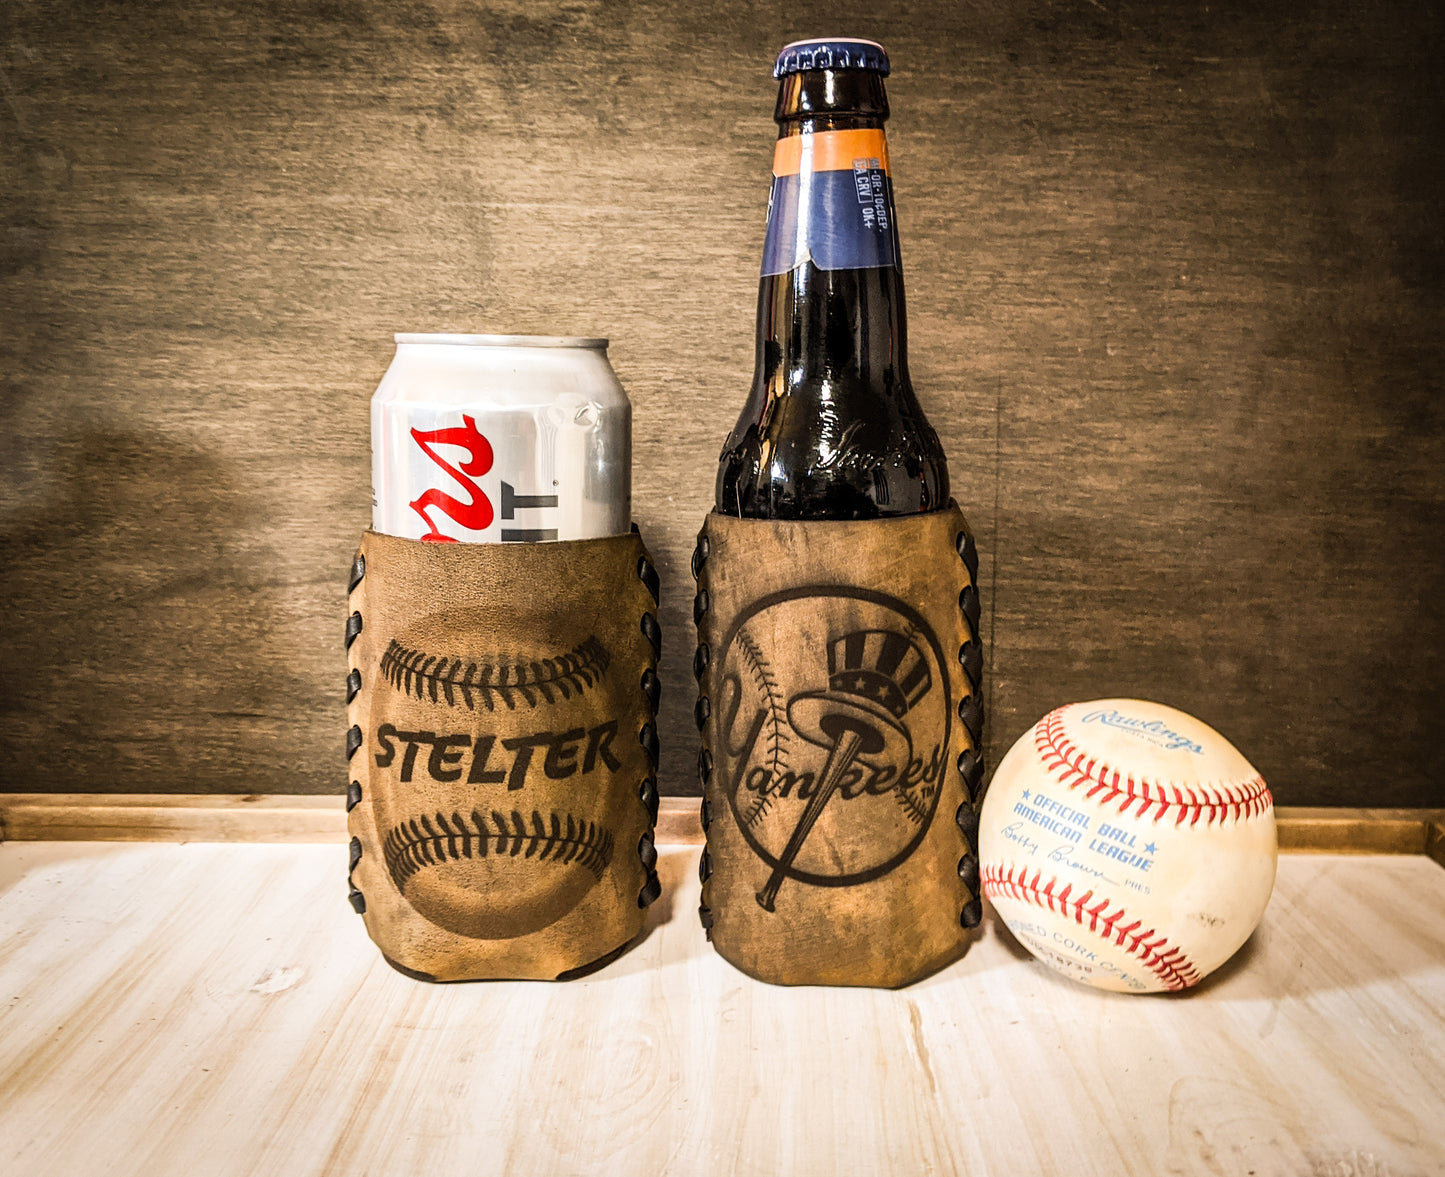 Premium leather drink sleeve personalized and custom fit to any can, bottle or glass